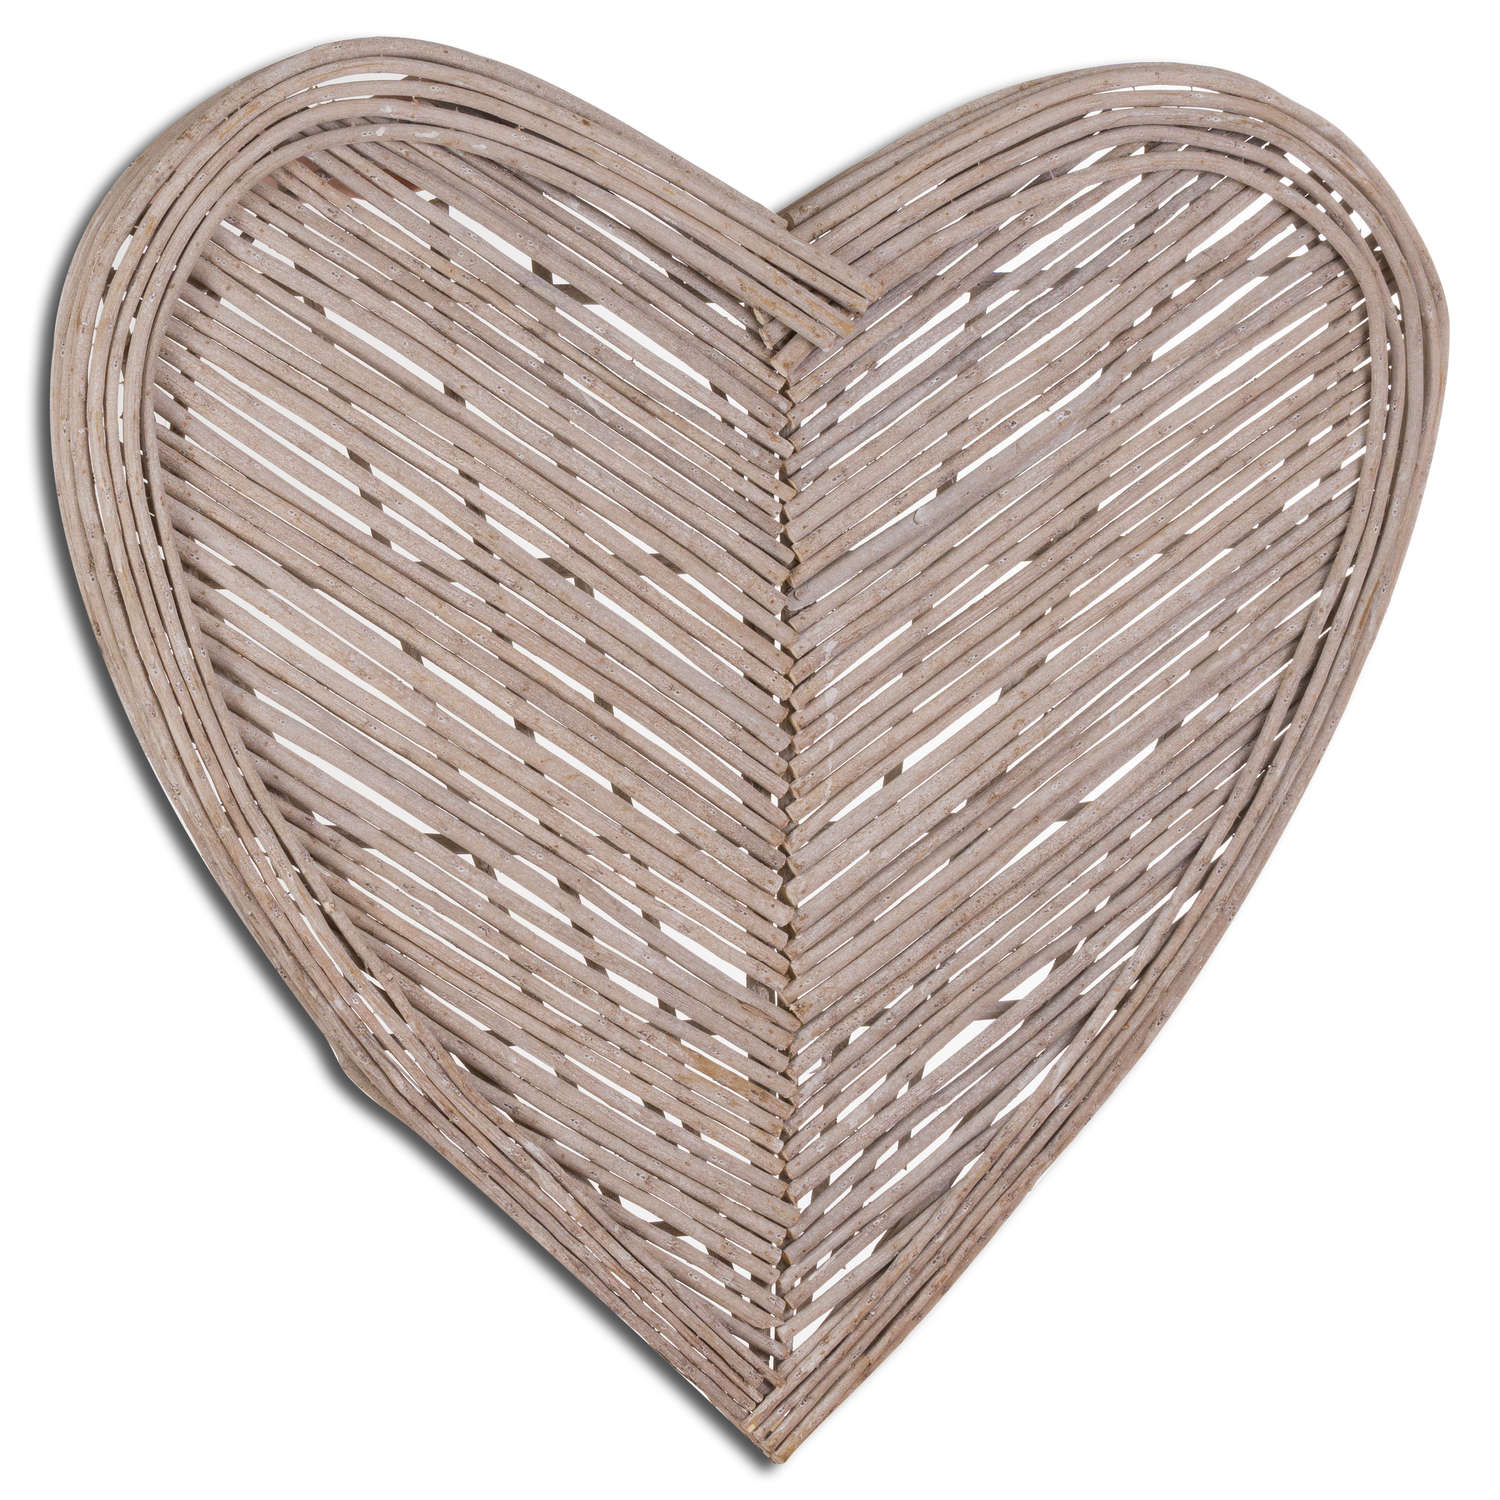 Natural Wicker Heart - Large